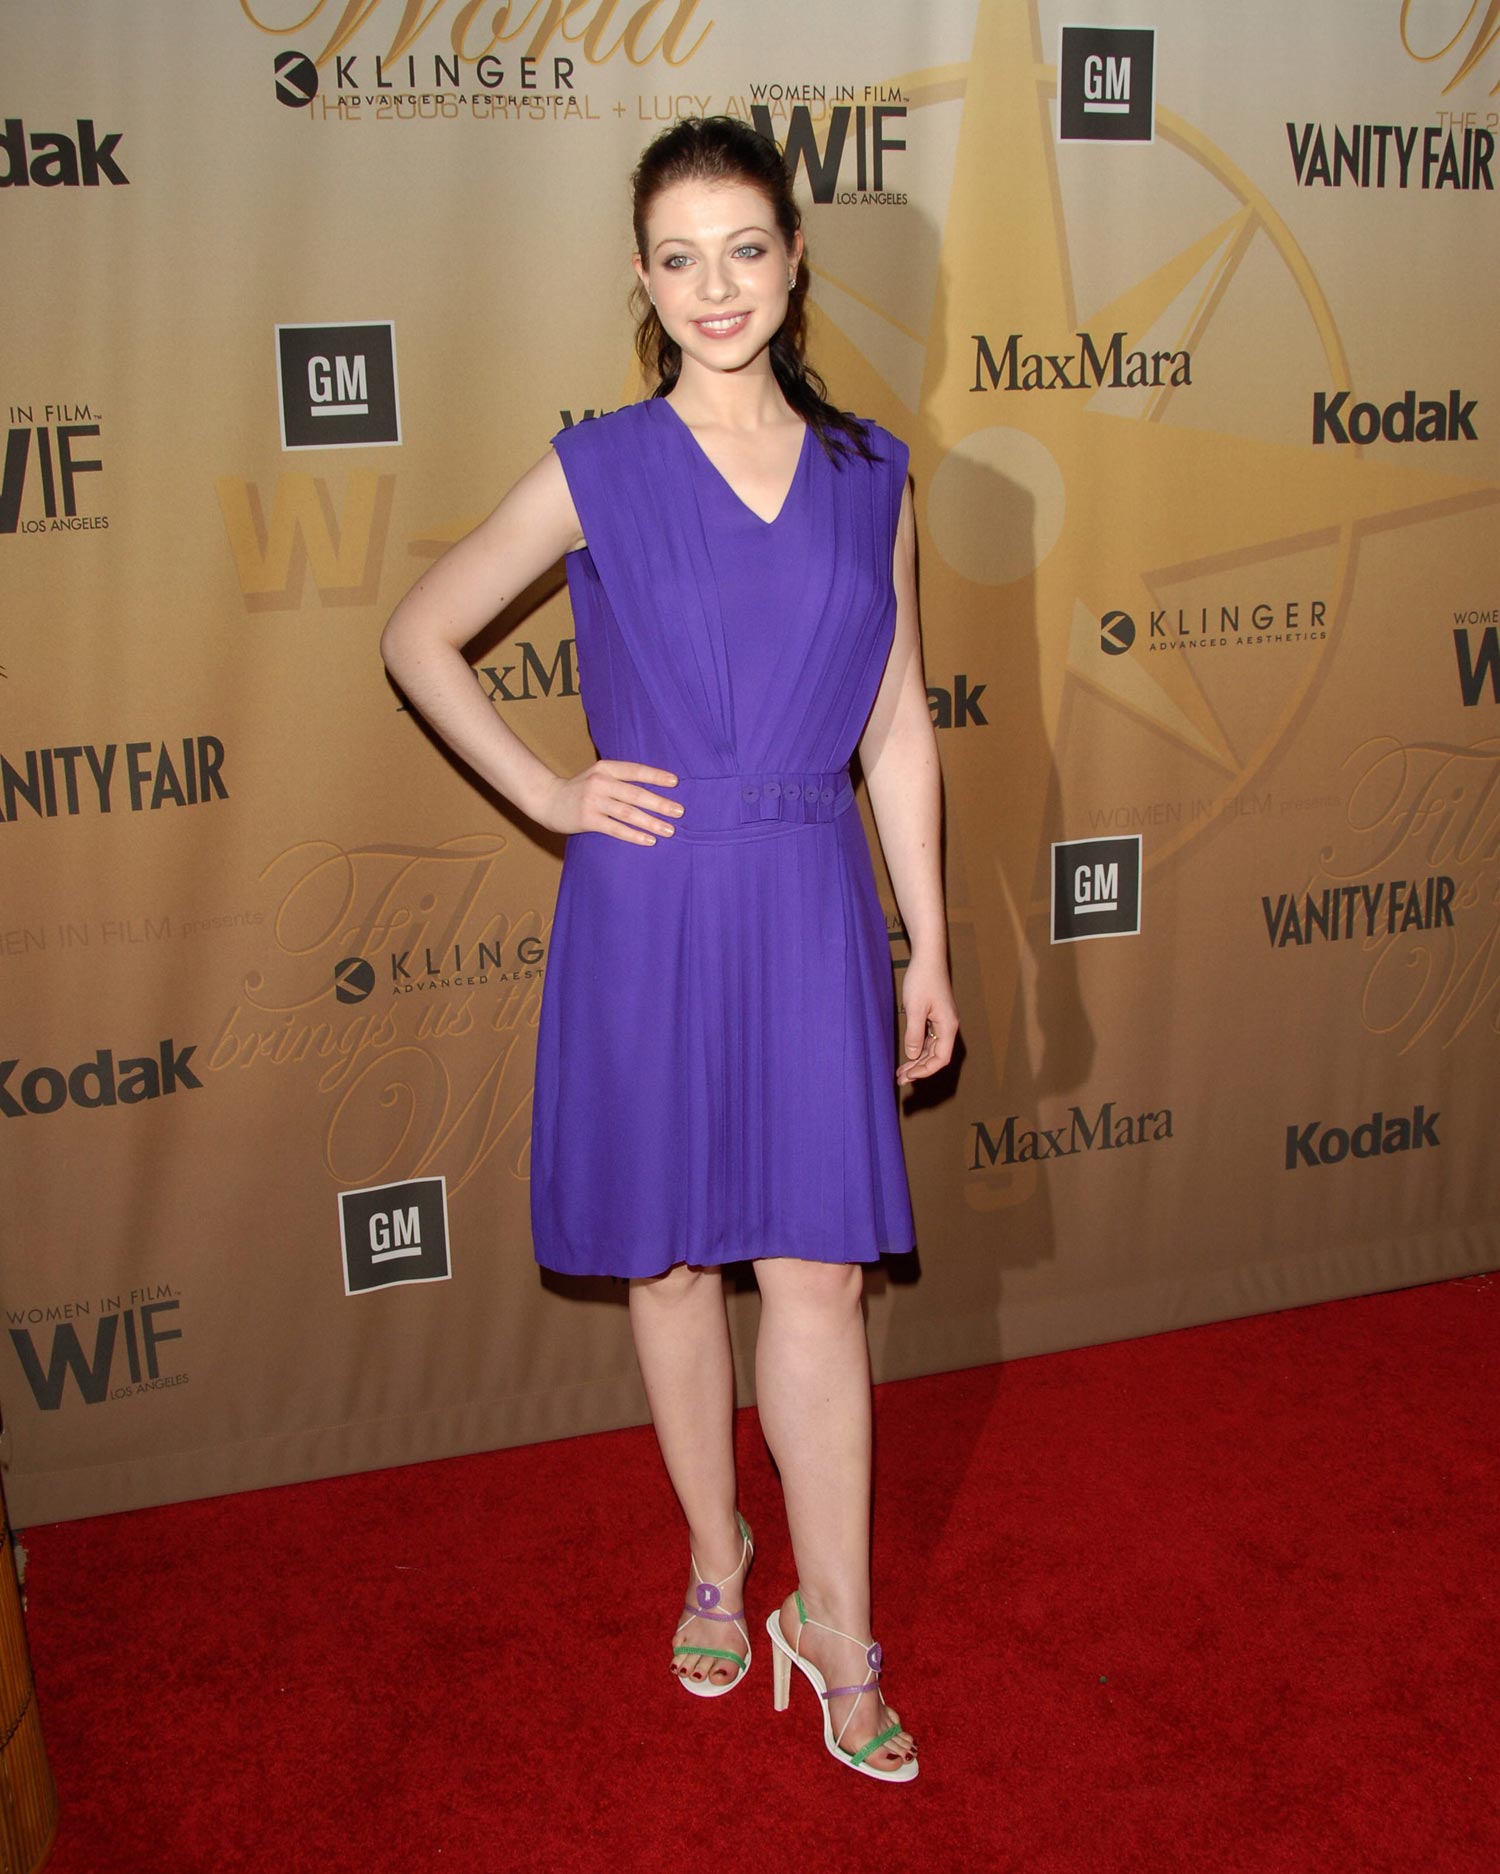 michelle-trachtenberg-crystal-lucy-awards-hq-32-1500.jpg